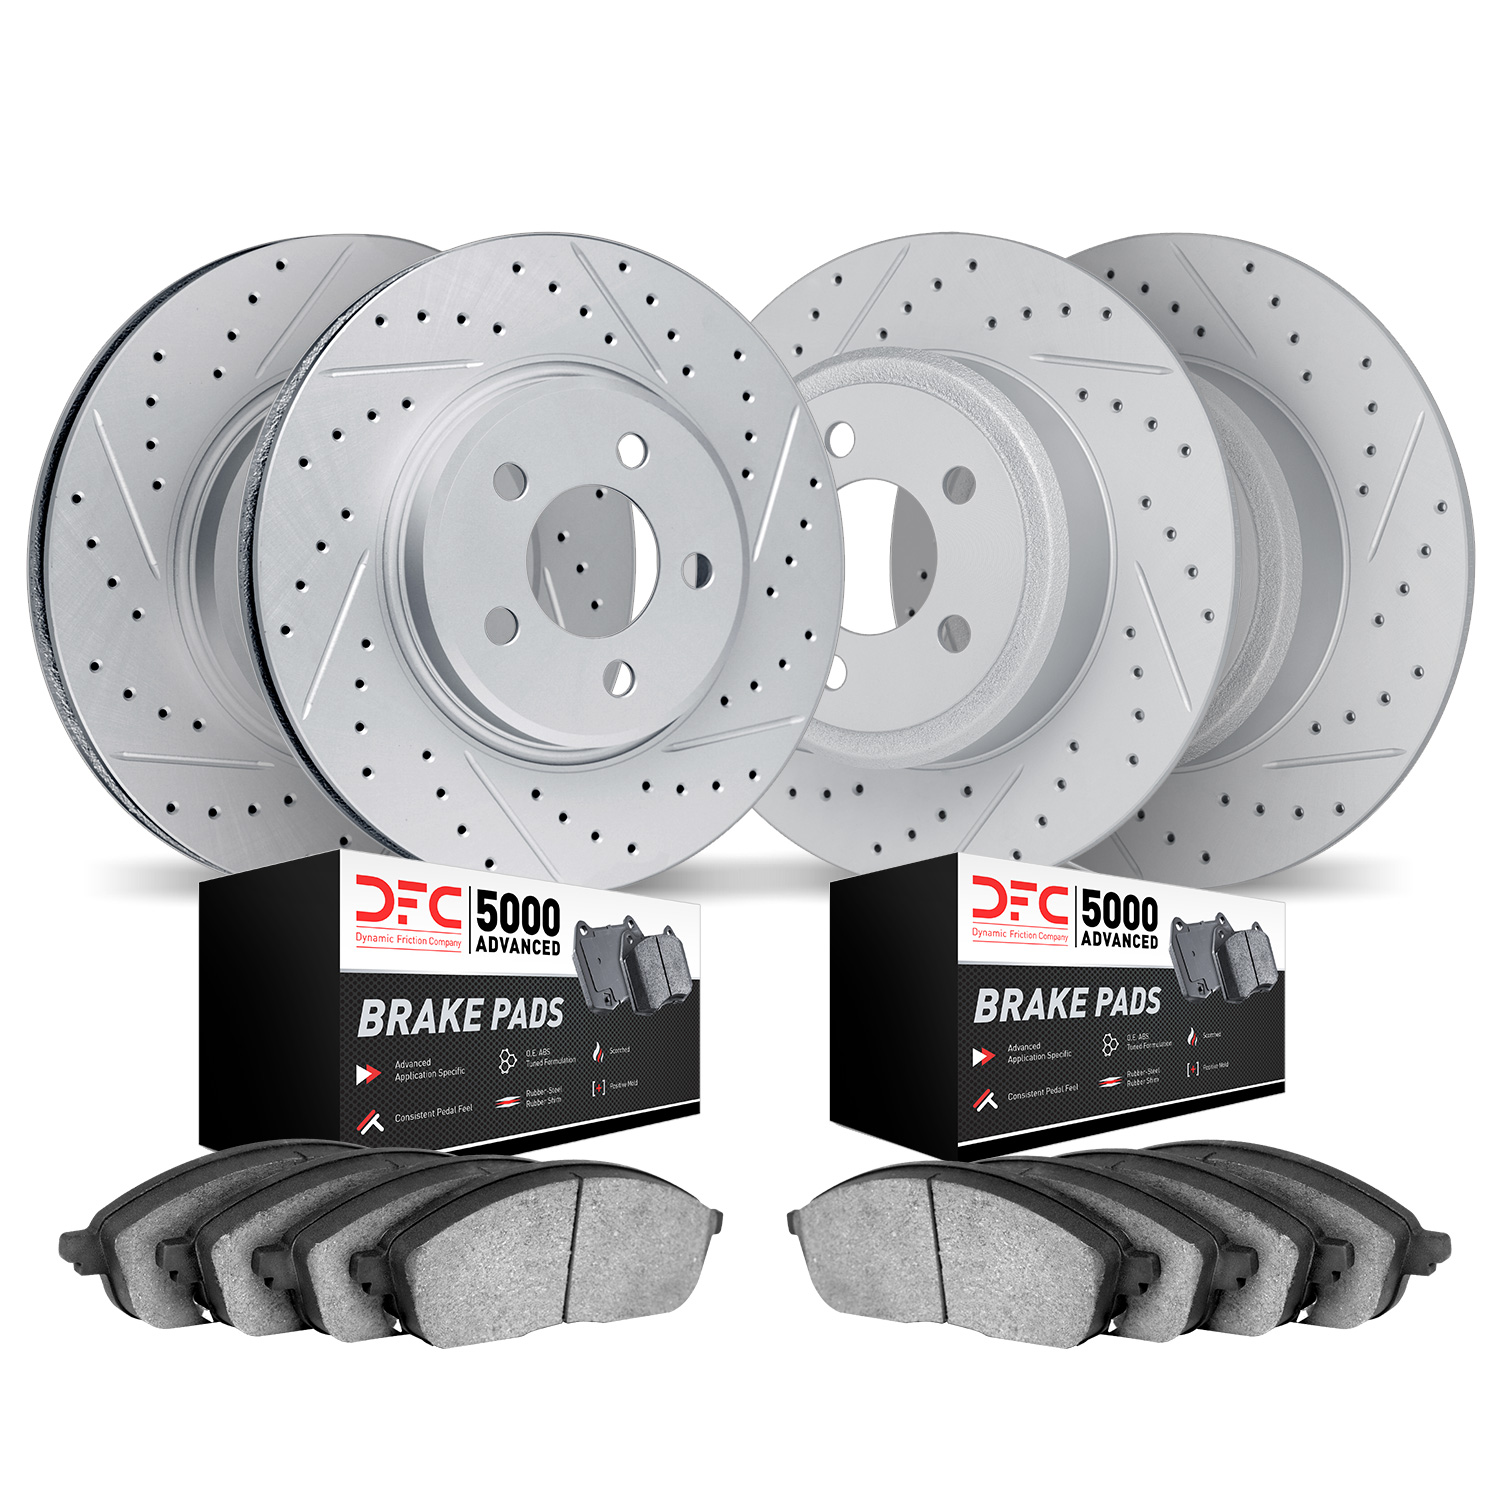 2504-20002 Geoperformance Drilled/Slotted Rotors w/5000 Advanced Brake Pads Kit, 2003-2005 Jaguar, Position: Front and Rear